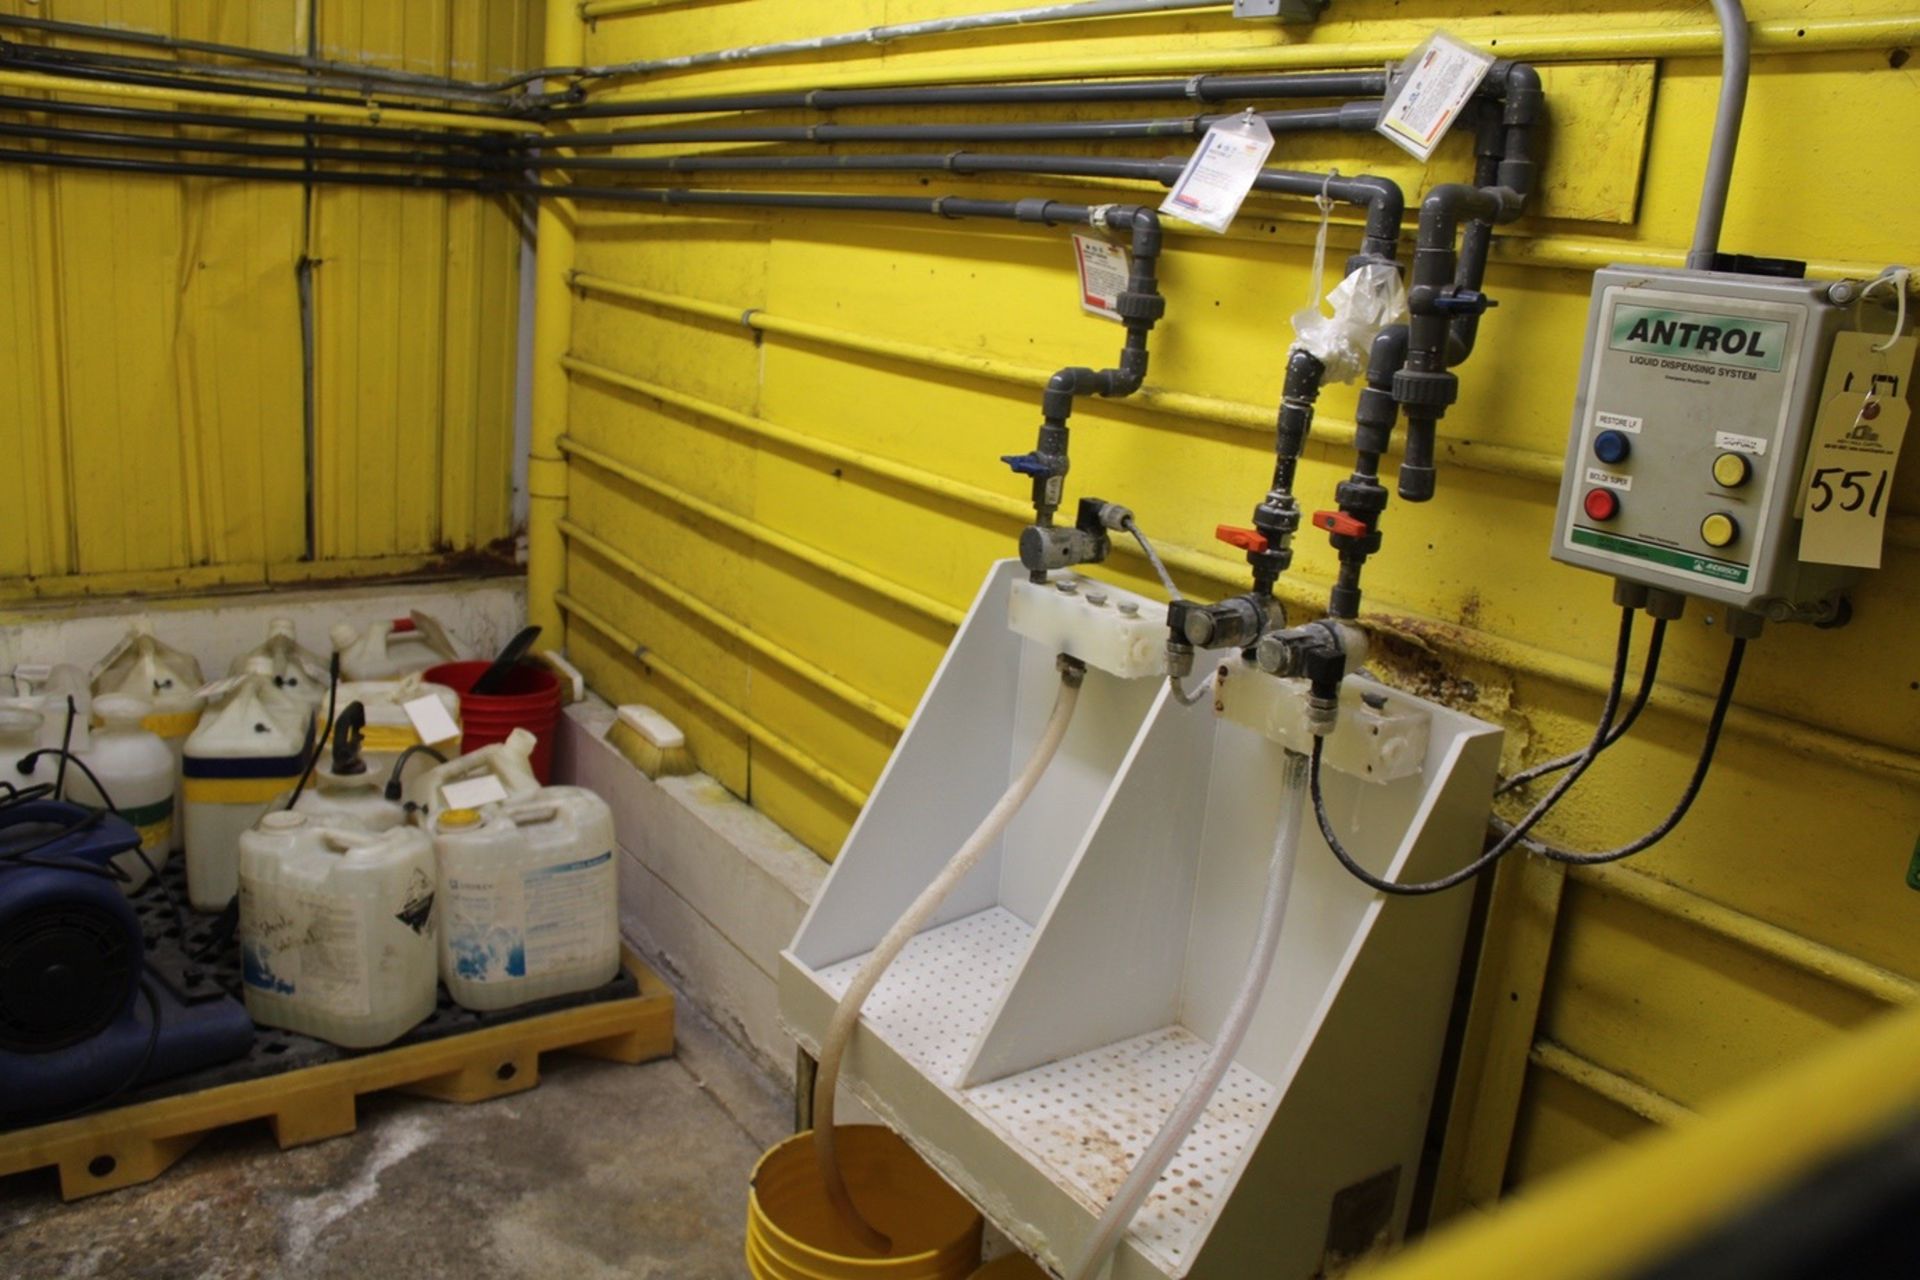 Anderson Chemical Co. Antrol Liquid Dispensing System | Rigging: $85